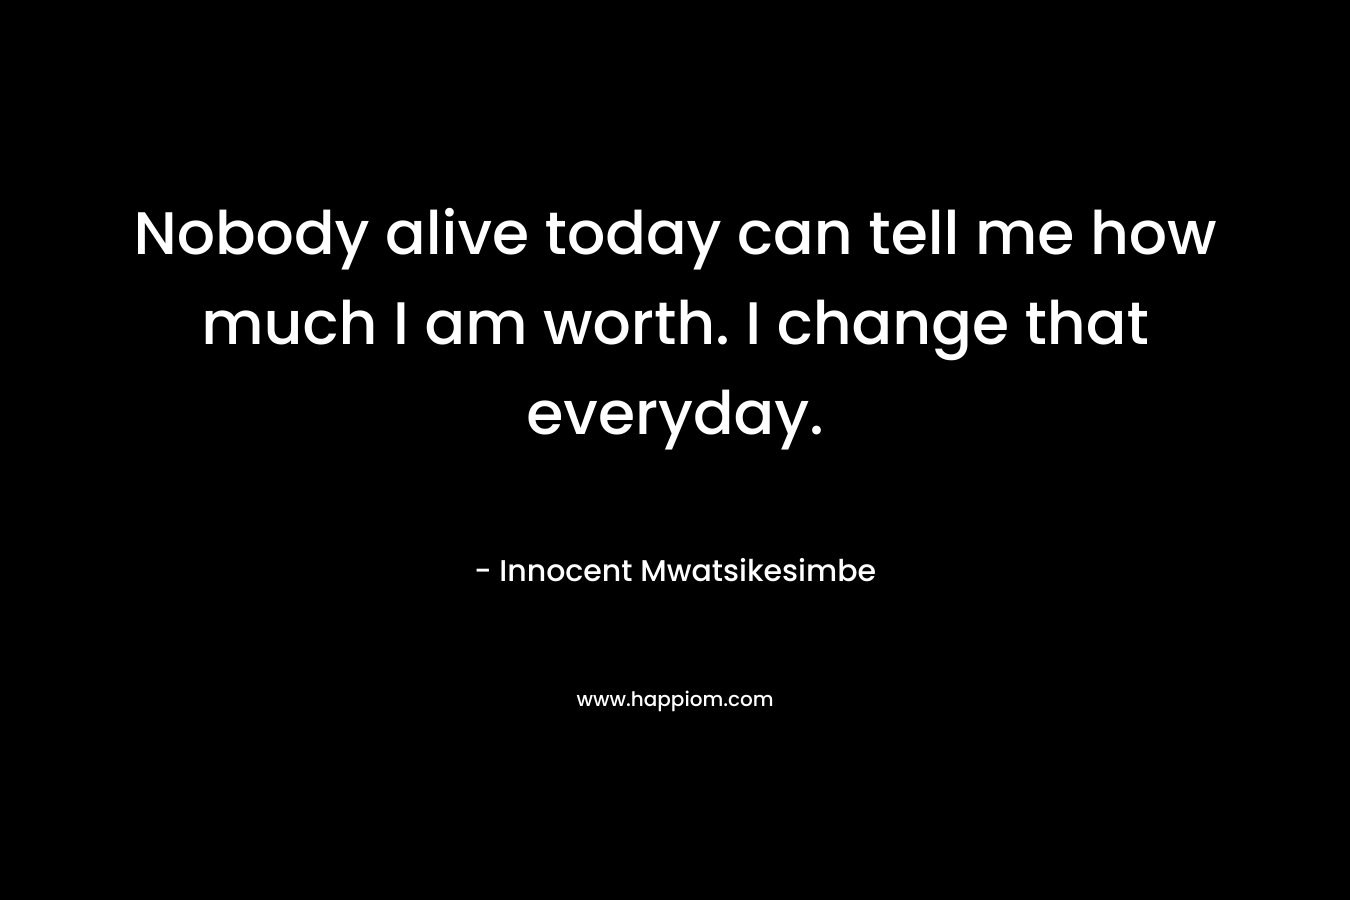 Nobody alive today can tell me how much I am worth. I change that everyday.